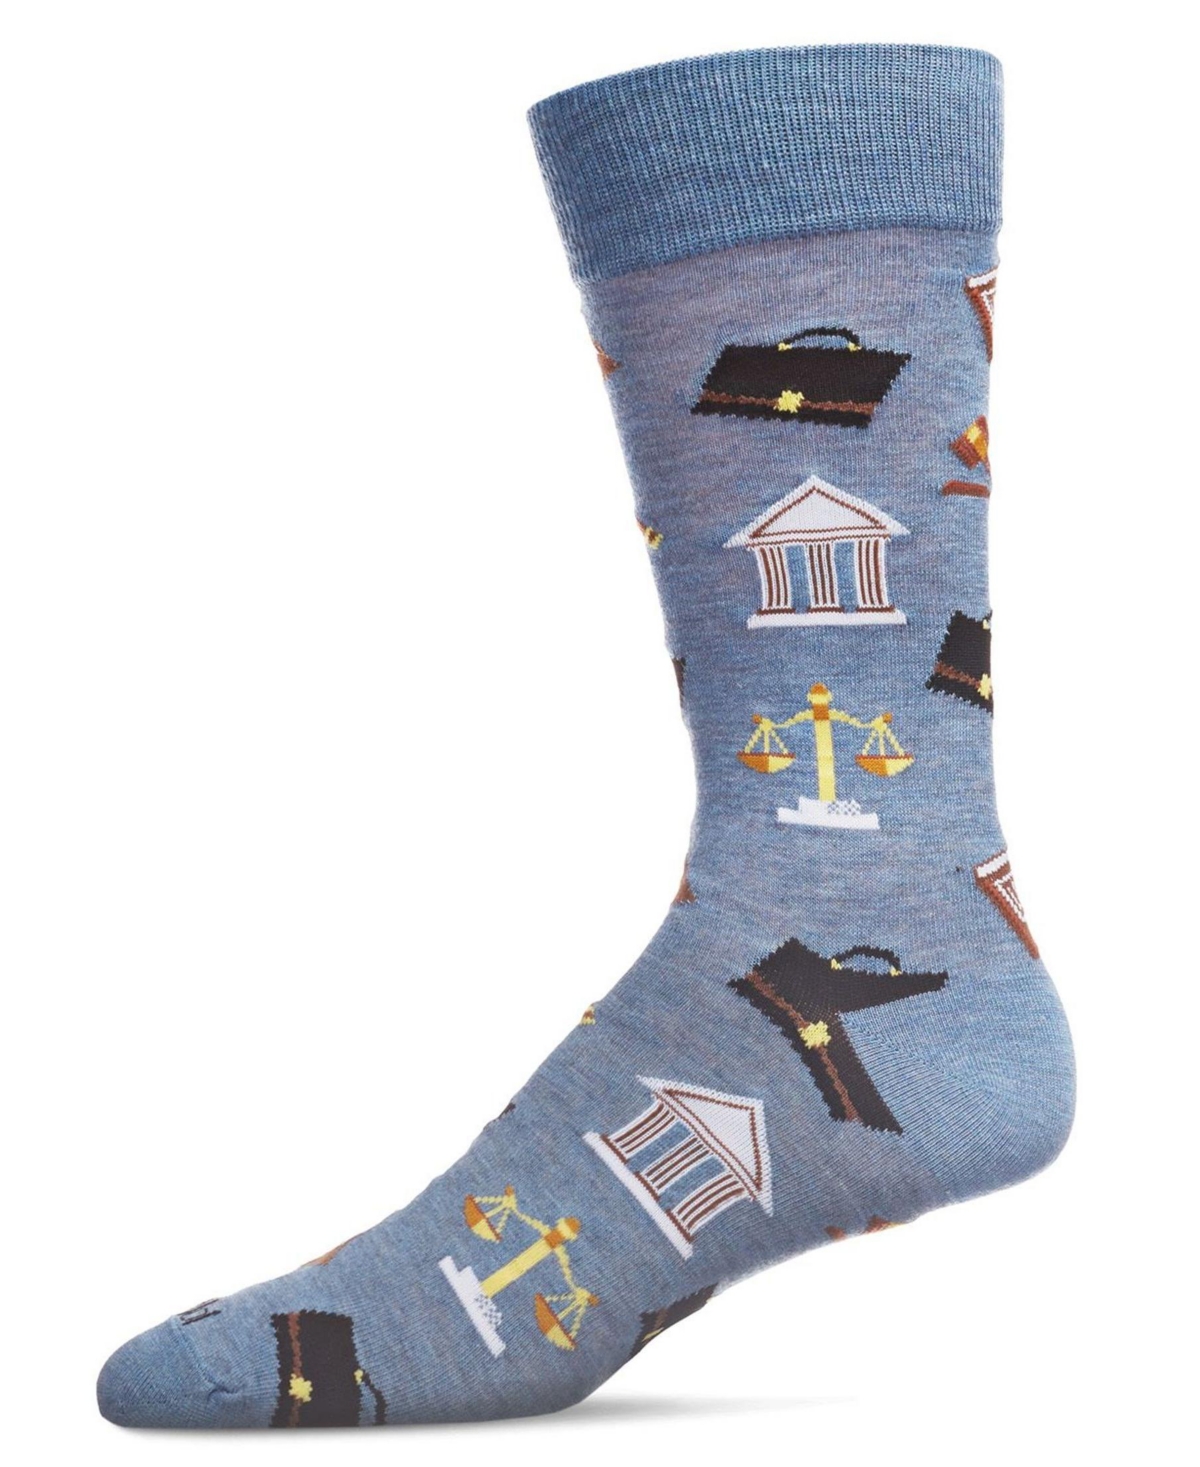 Men's Law and Order Heathered Rayon from Bamboo Novelty Crew Socks - Denim Heather